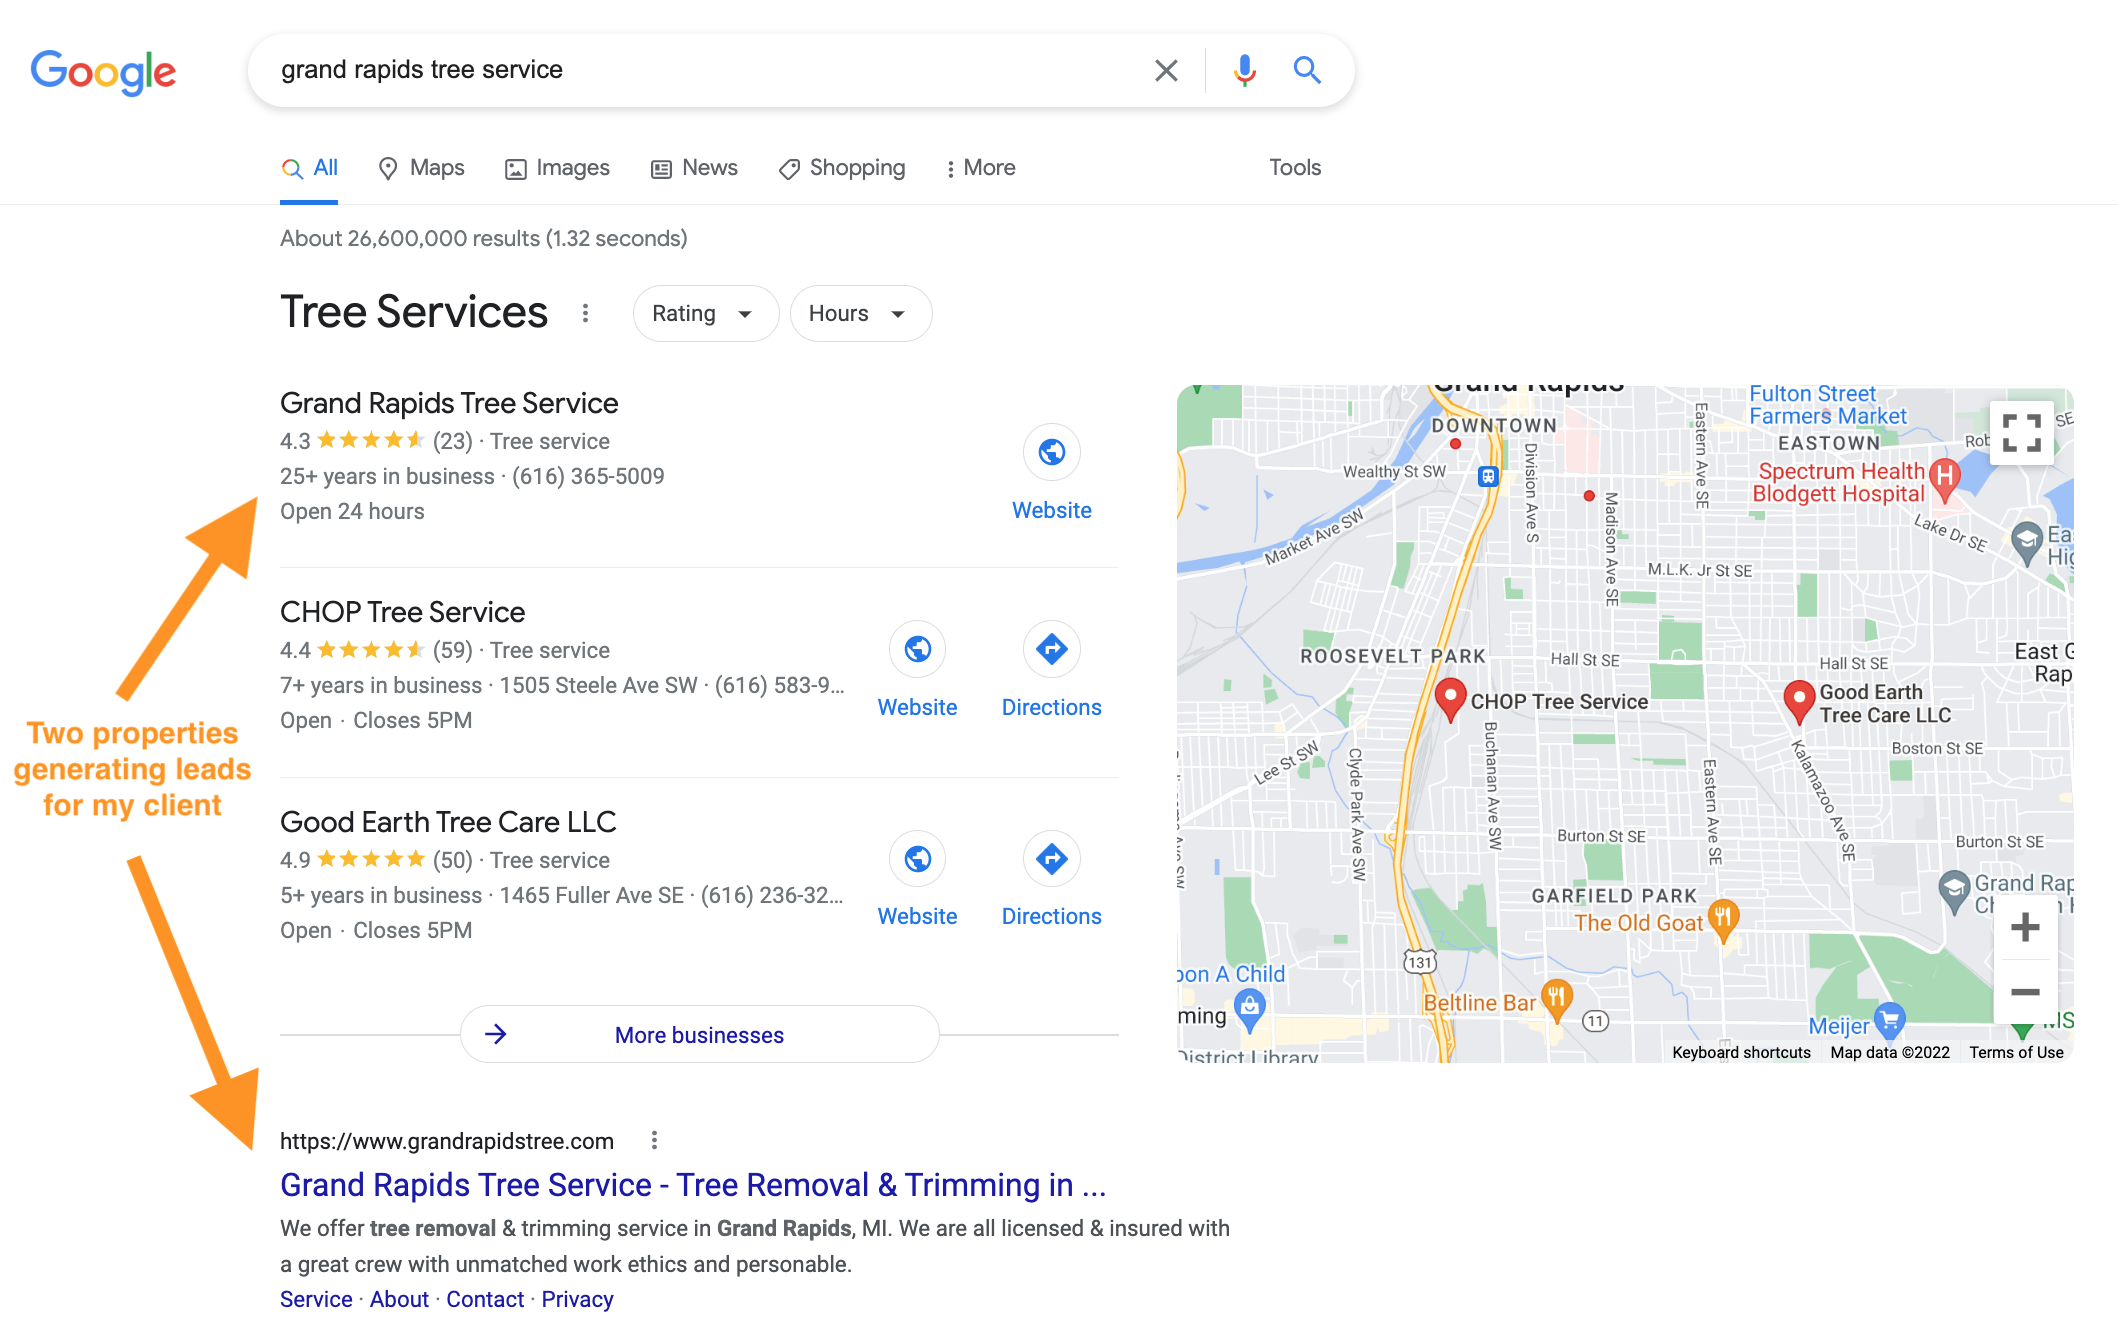 Grand rapids tree service search query overview